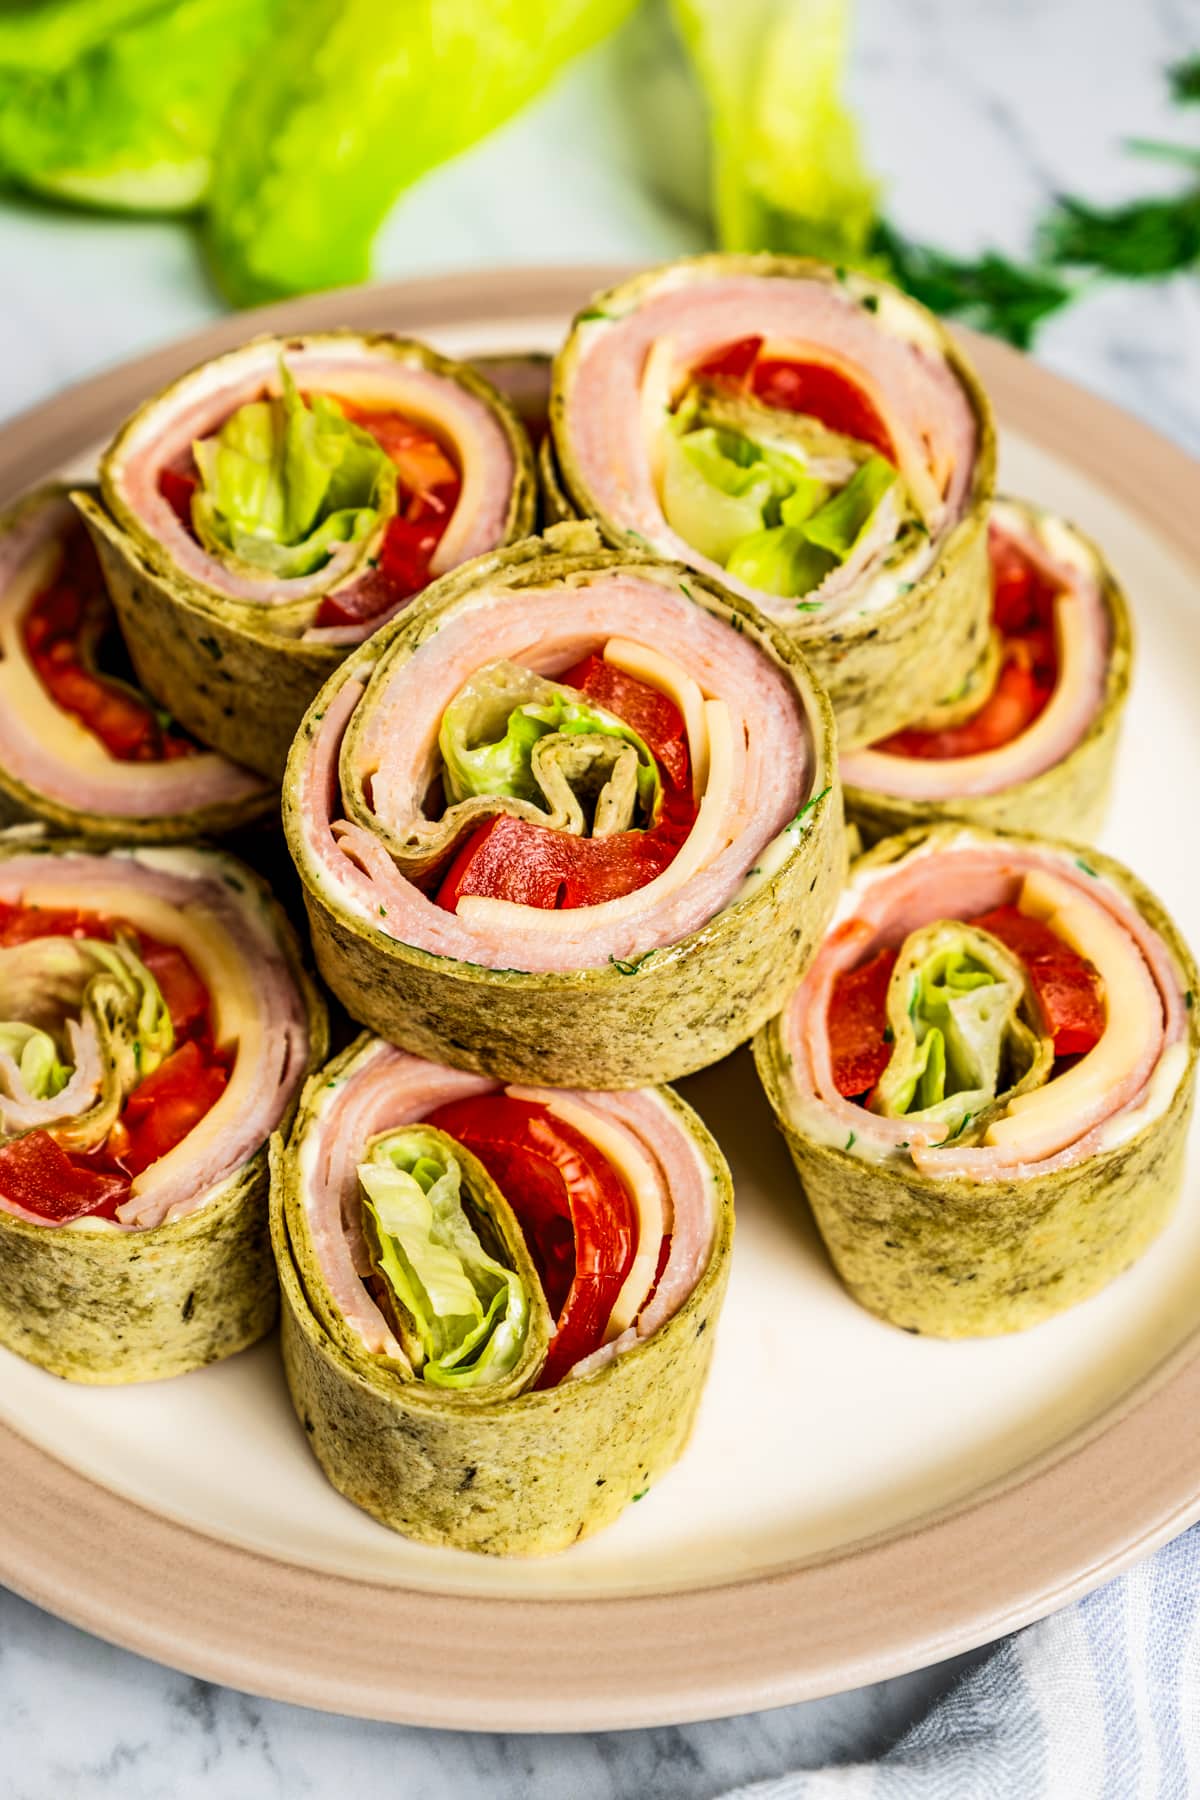 Pinwheel sandwiches stacked on a plate.